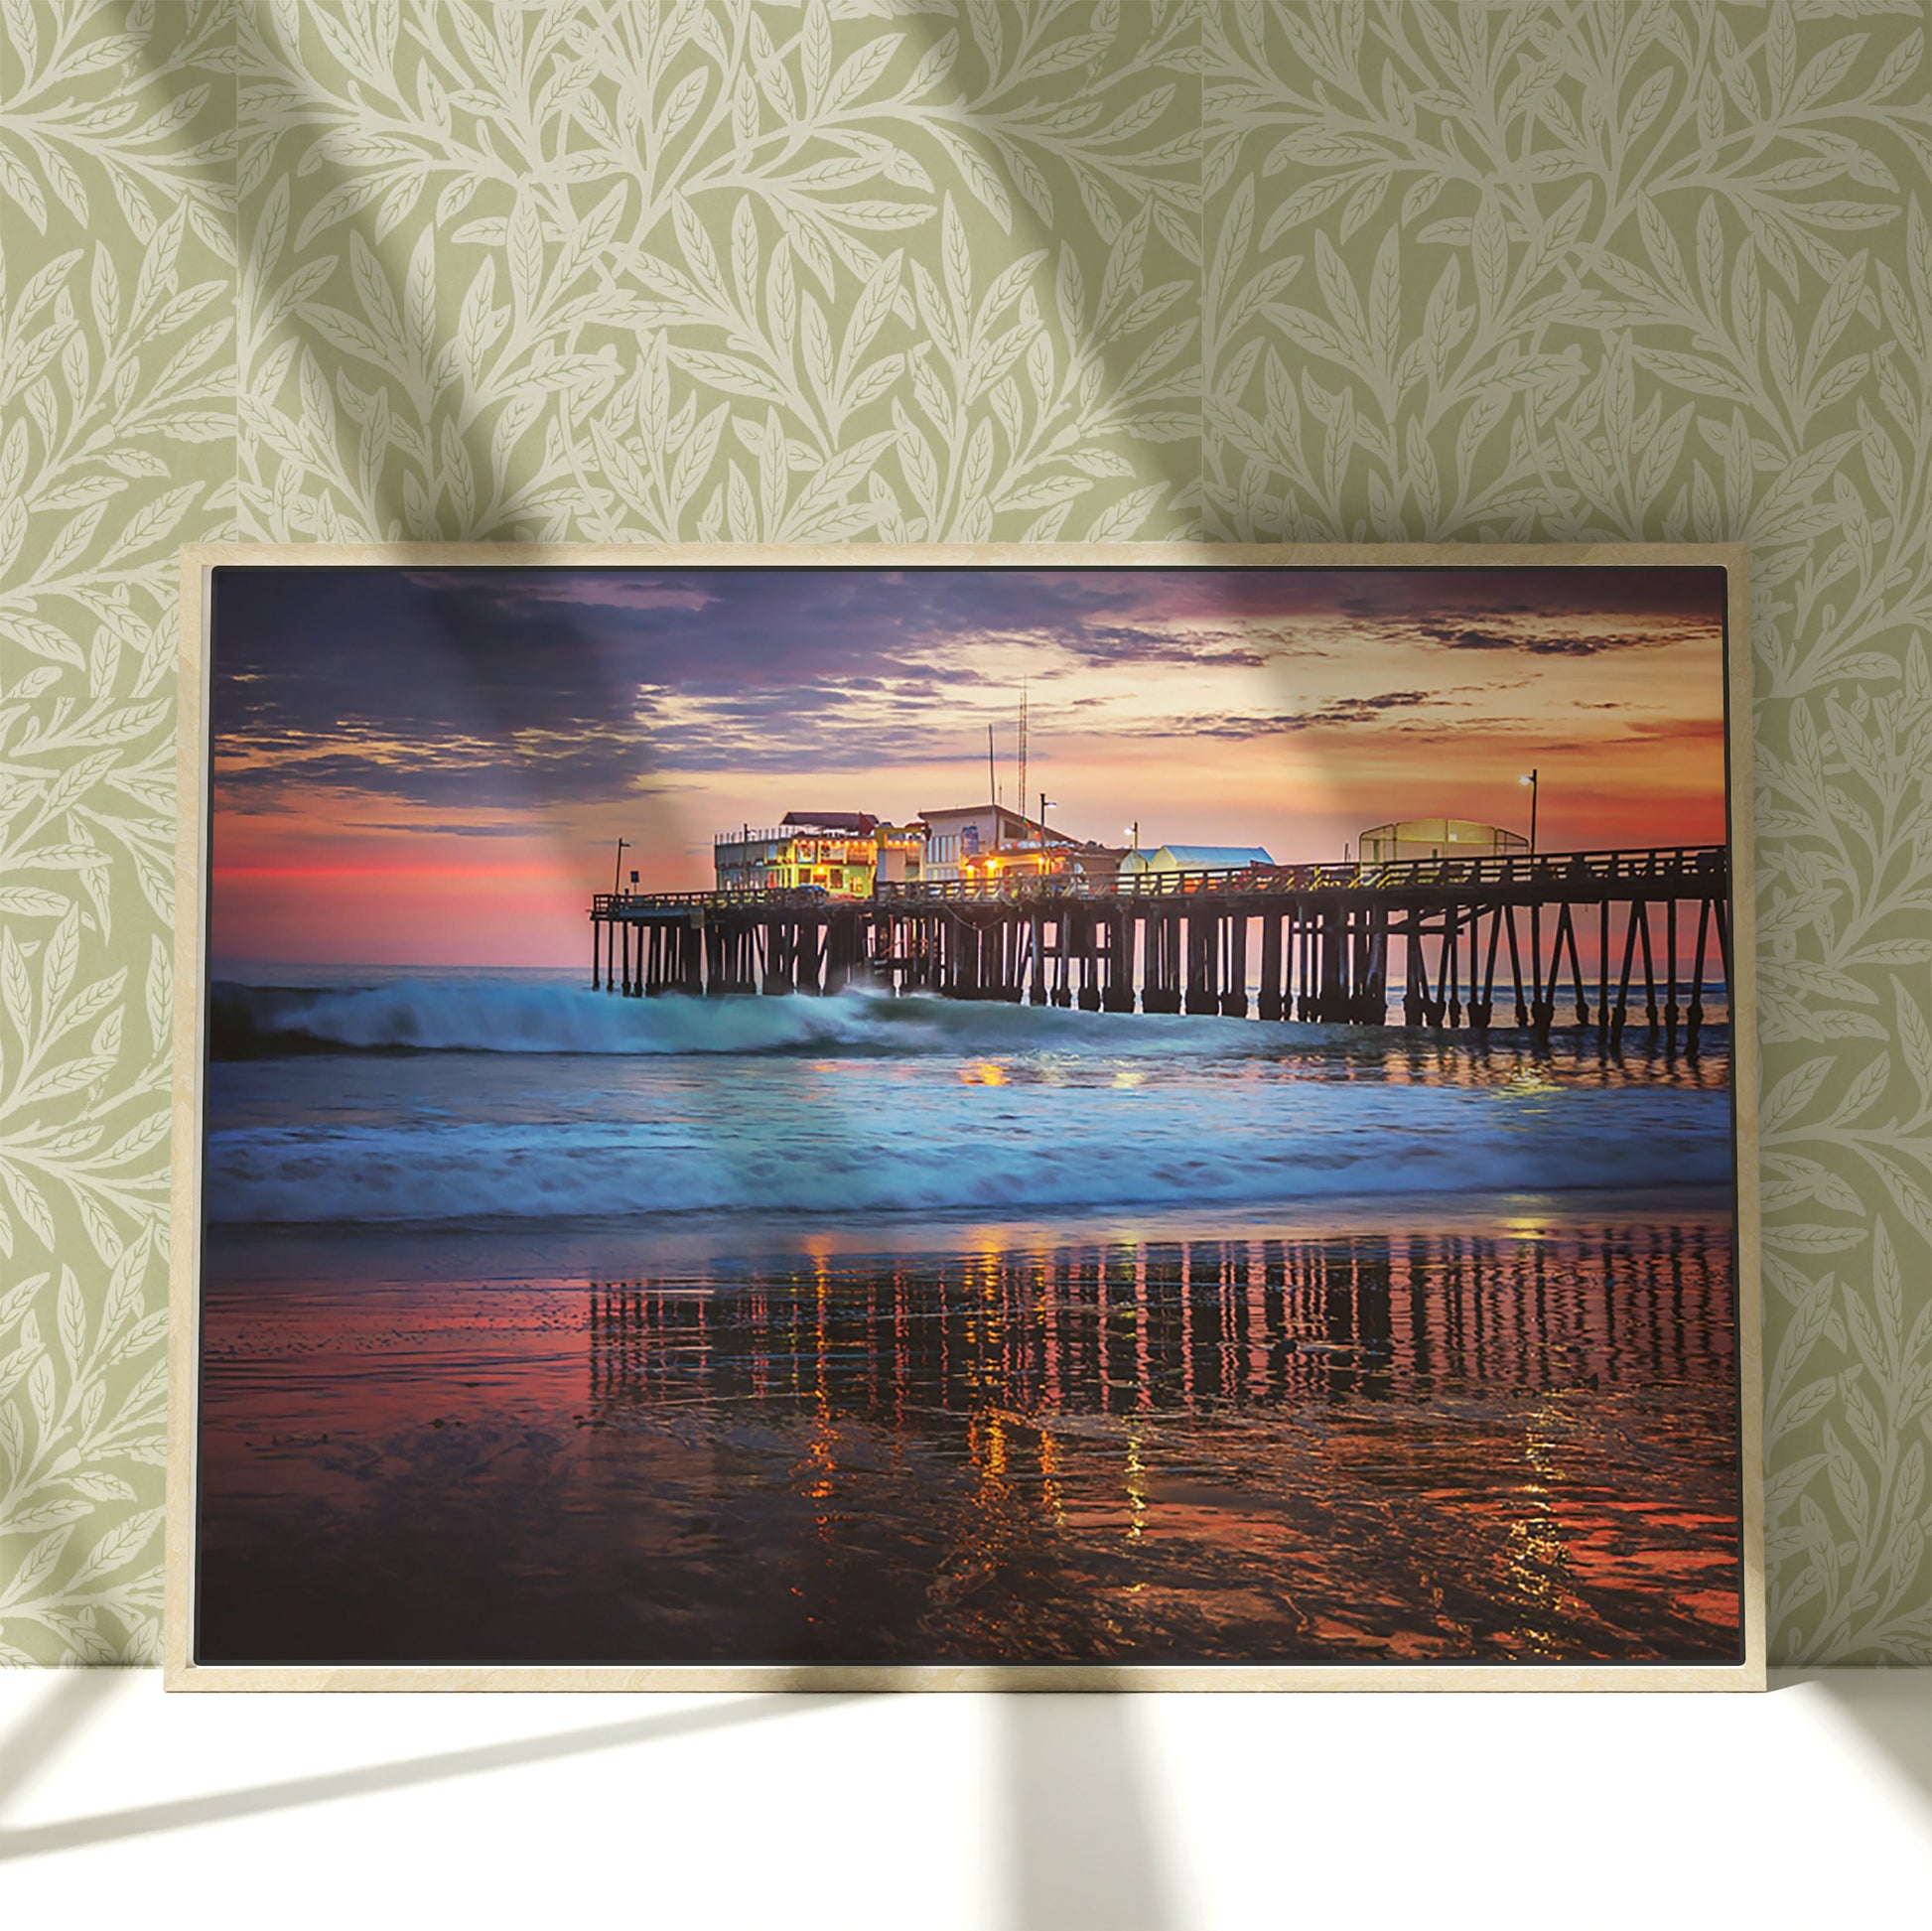 a painting of a pier at sunset on a wall